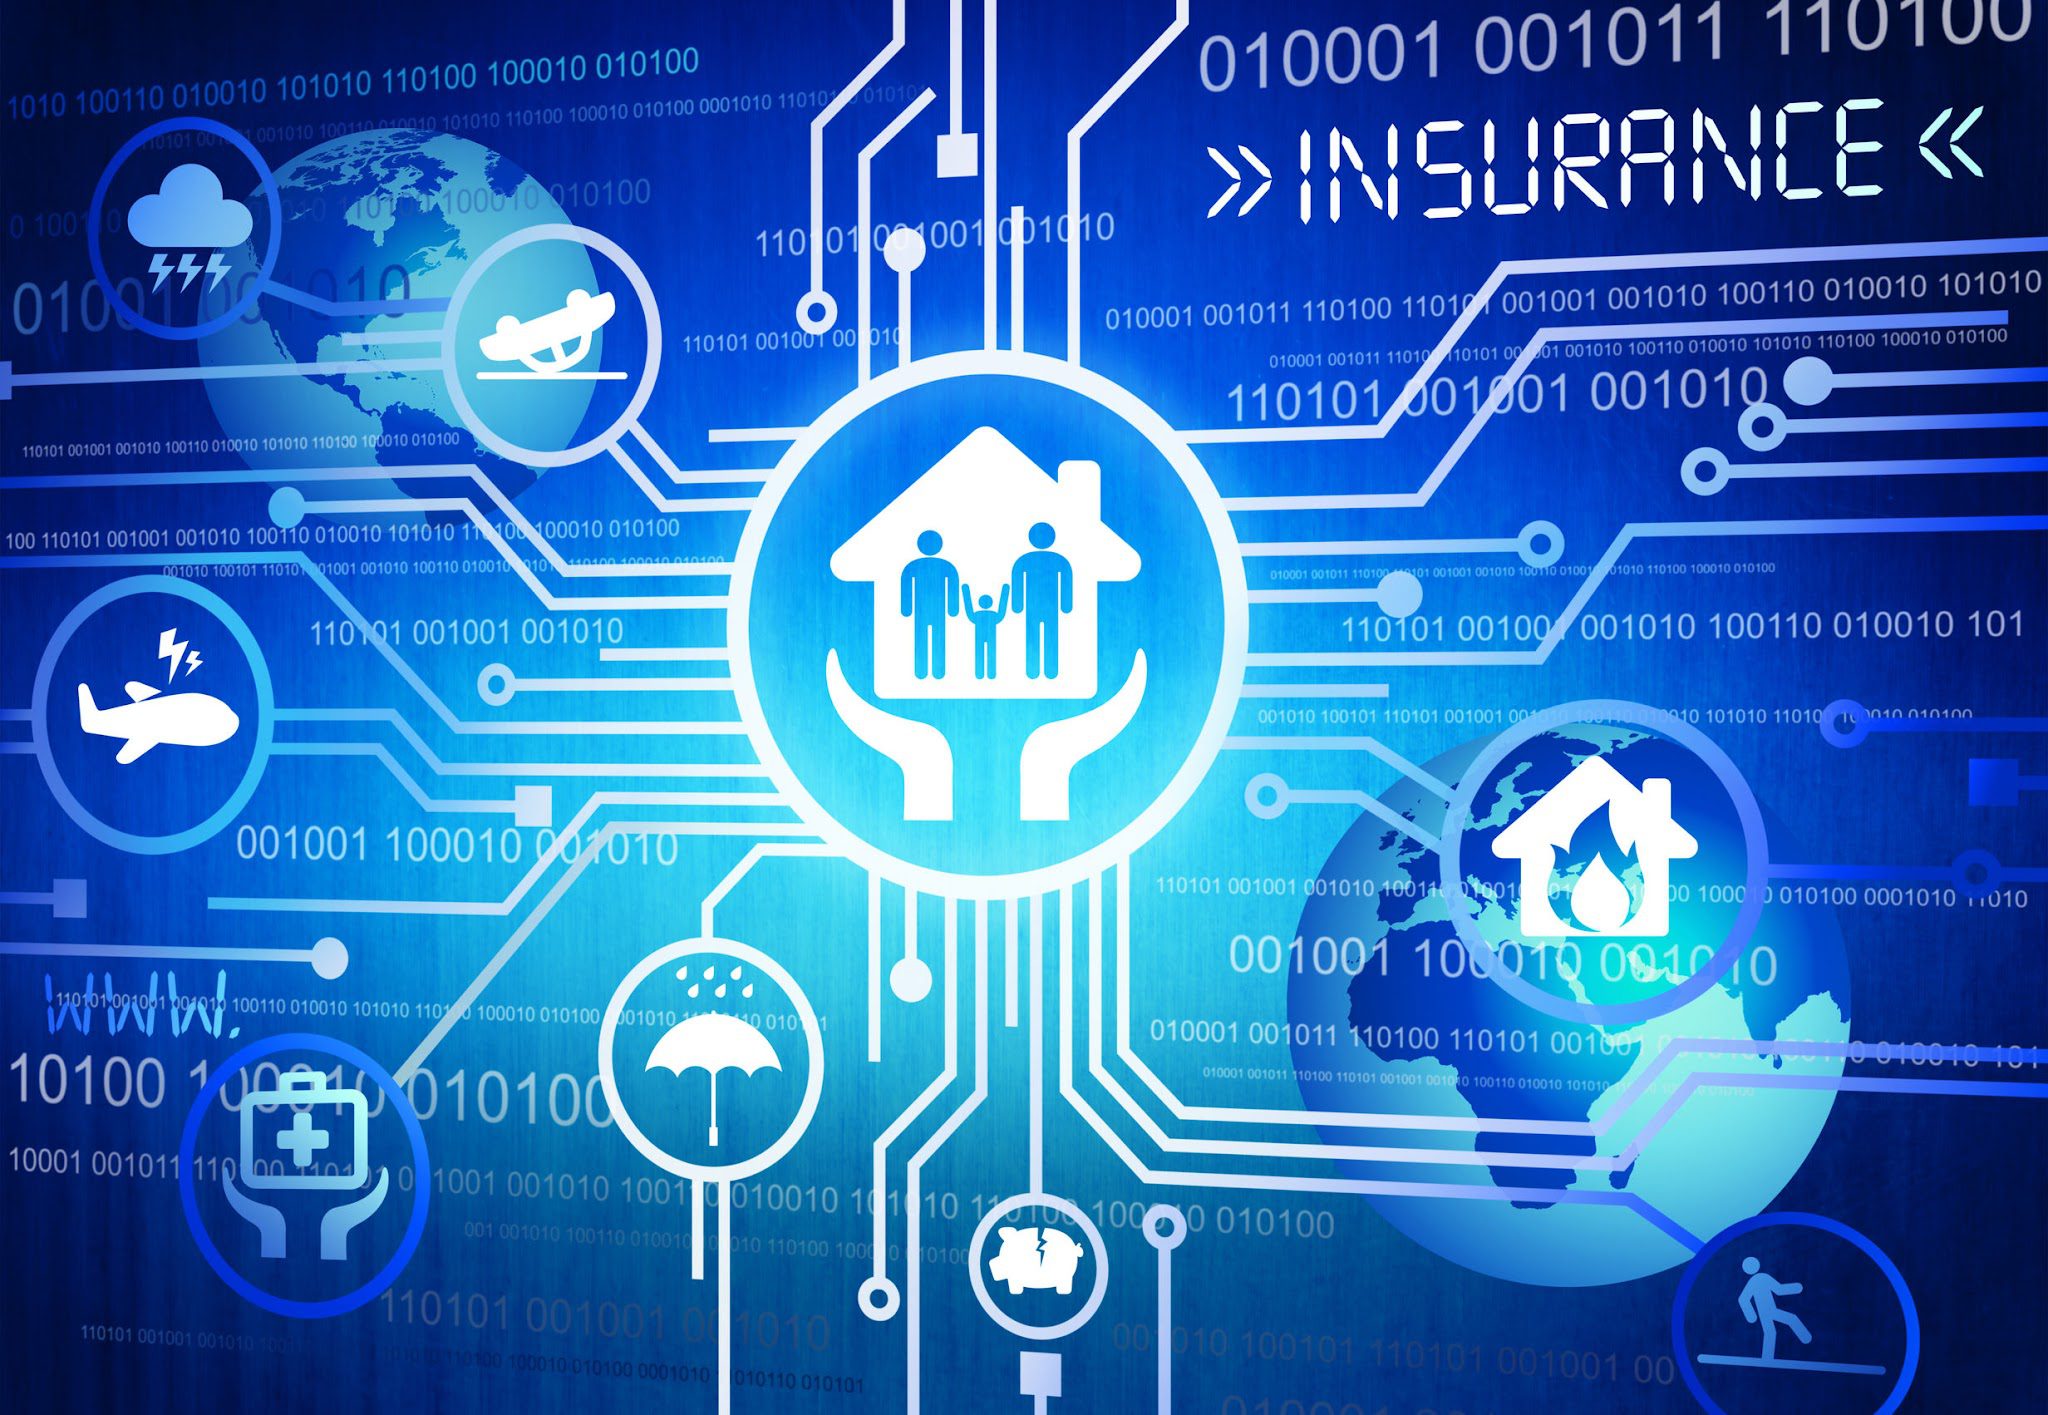 The Rise of Insuretech: Why are Kenyans embracing this technology